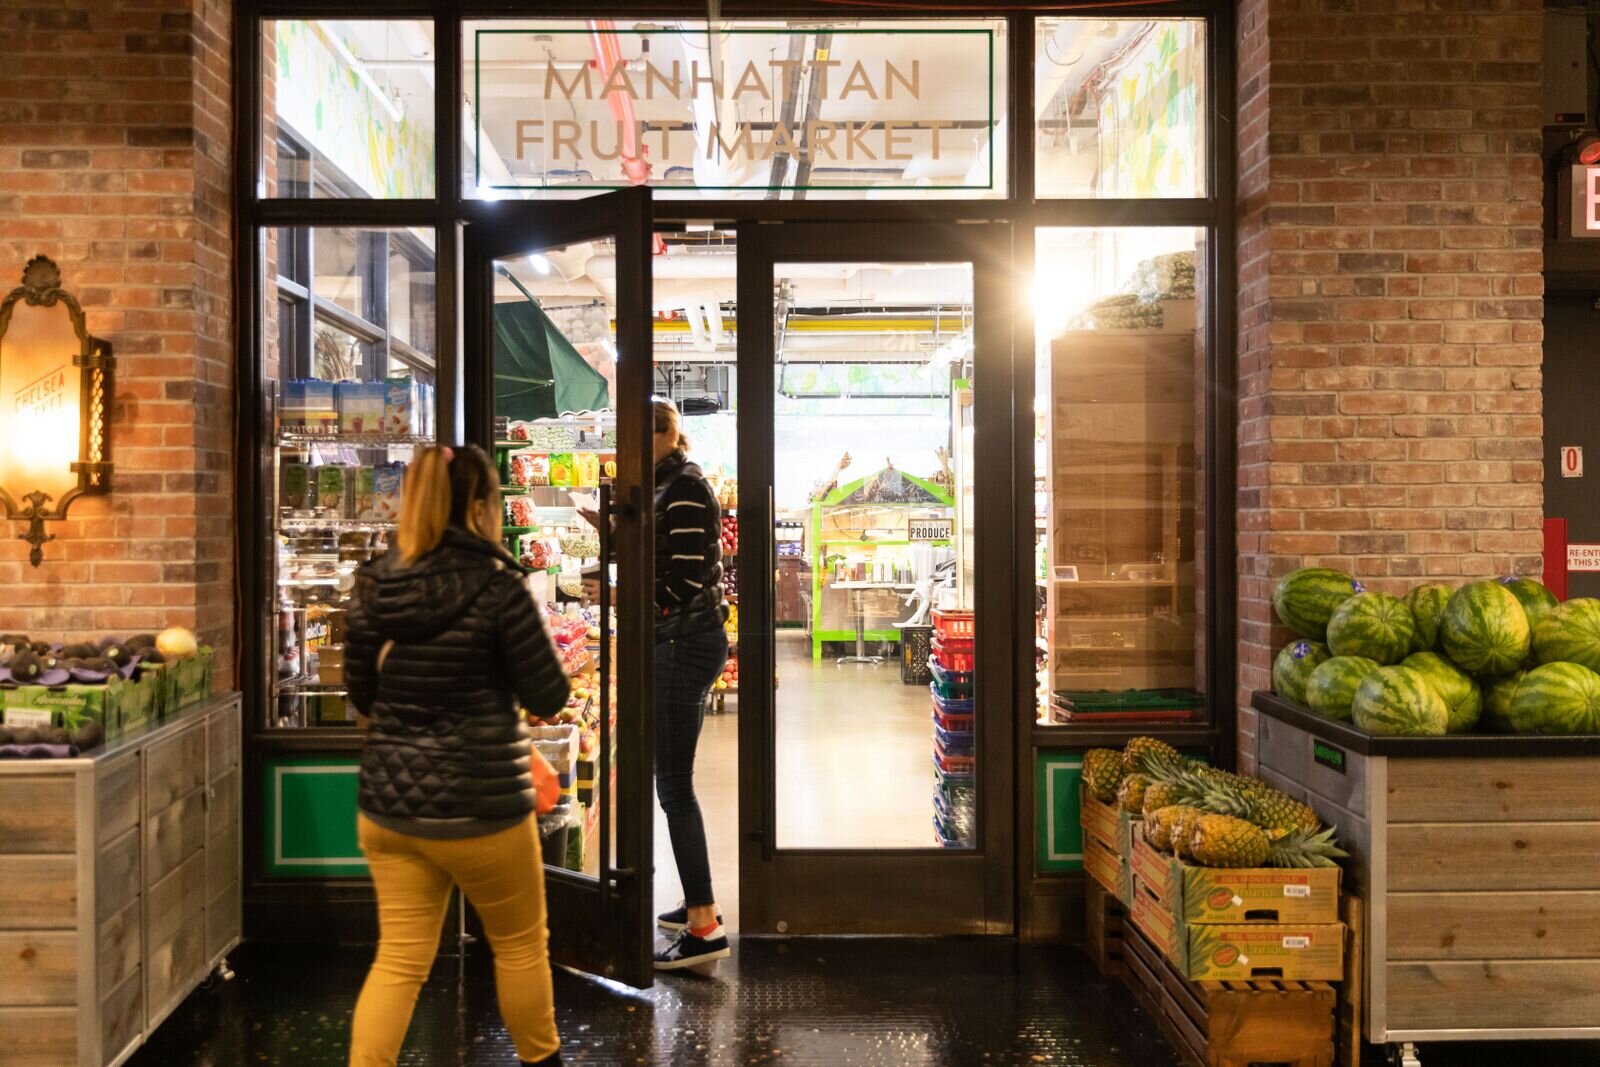 interior entrance to Manhattan Fruit Market with people walking through the doors 